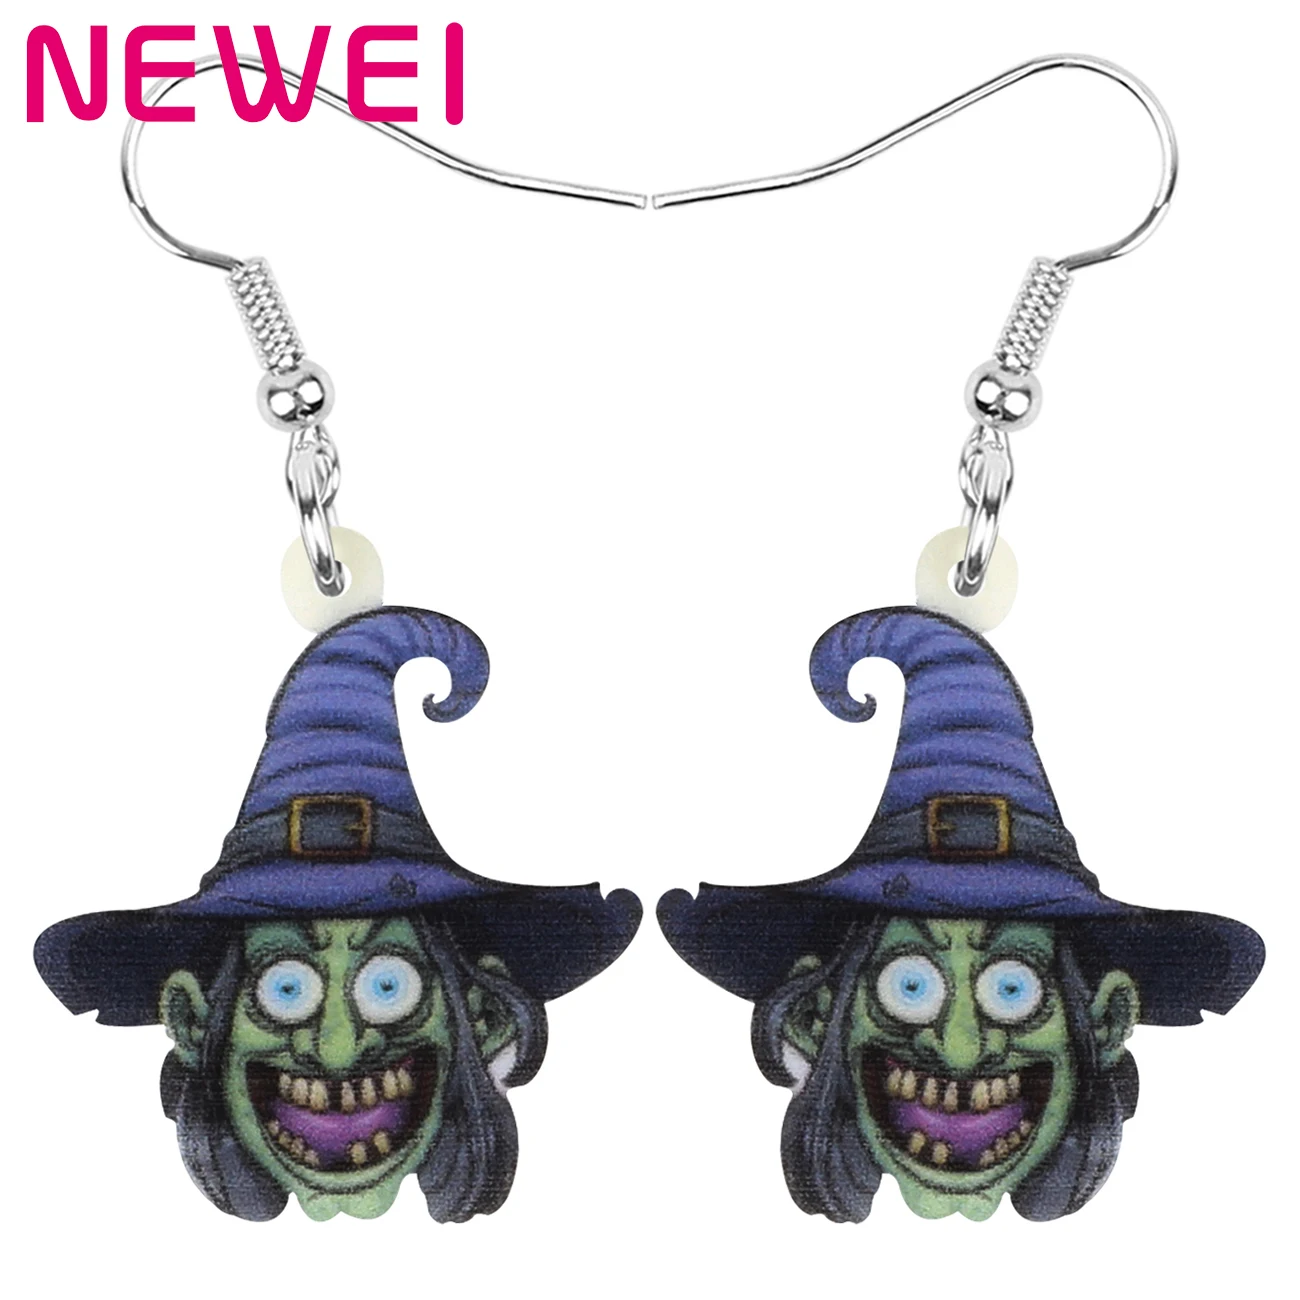 

Halloween Acrylic Zombie Witch Earrings Drop Dangle Horrible Fashion Jewelry Charms For Women Girls Teens Kids Trendy Gifts, Multi color